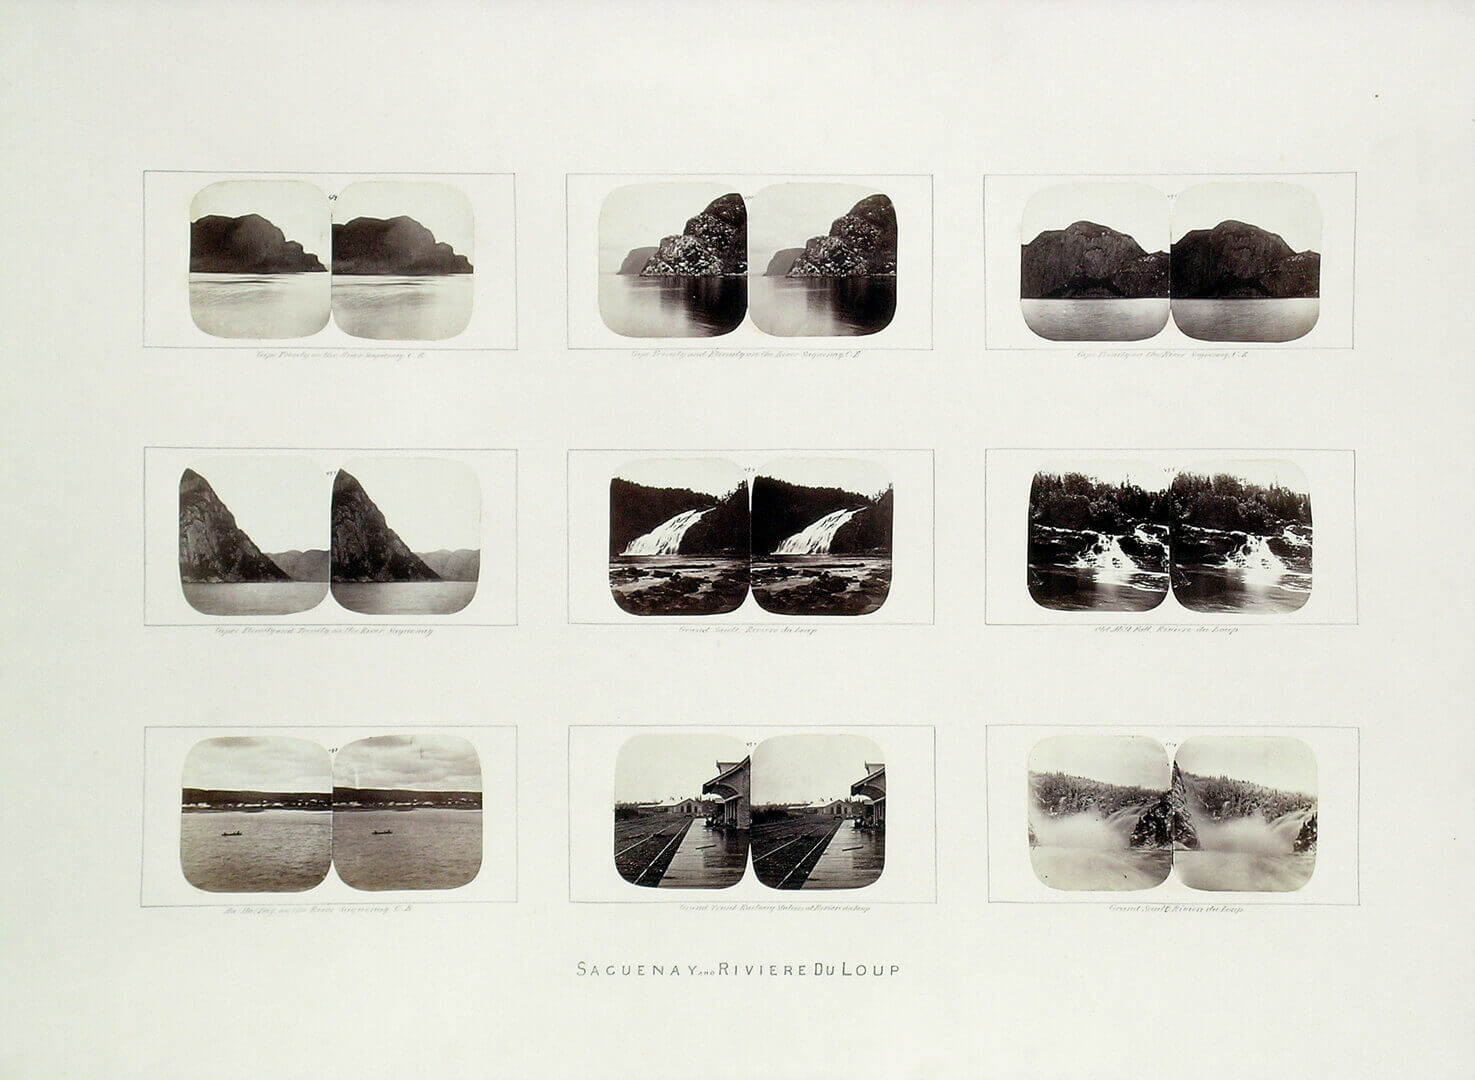 William Notman, Group of stereographs from the maple box, Saguenay and Rivière-du-Loup, Quebec, 1859–60